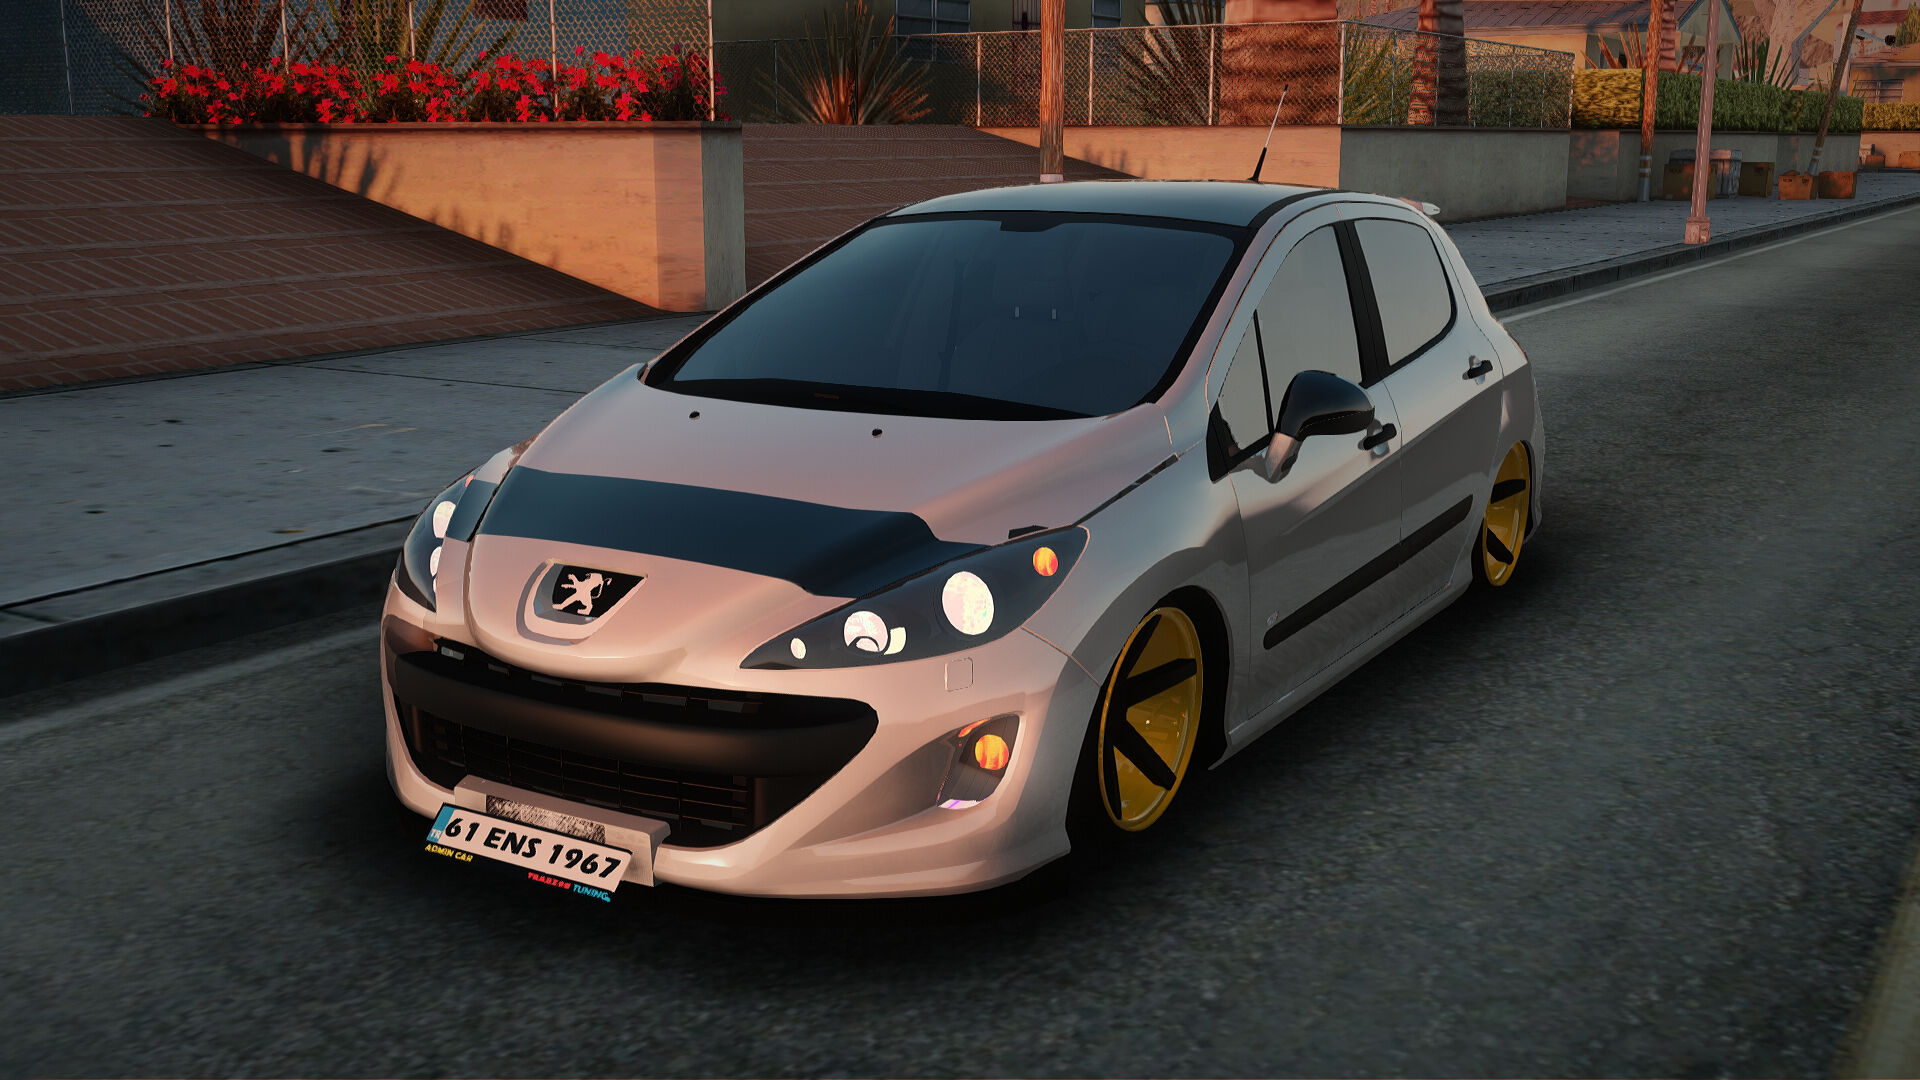 Grand Theft Auto V peugeot 107 tuning 